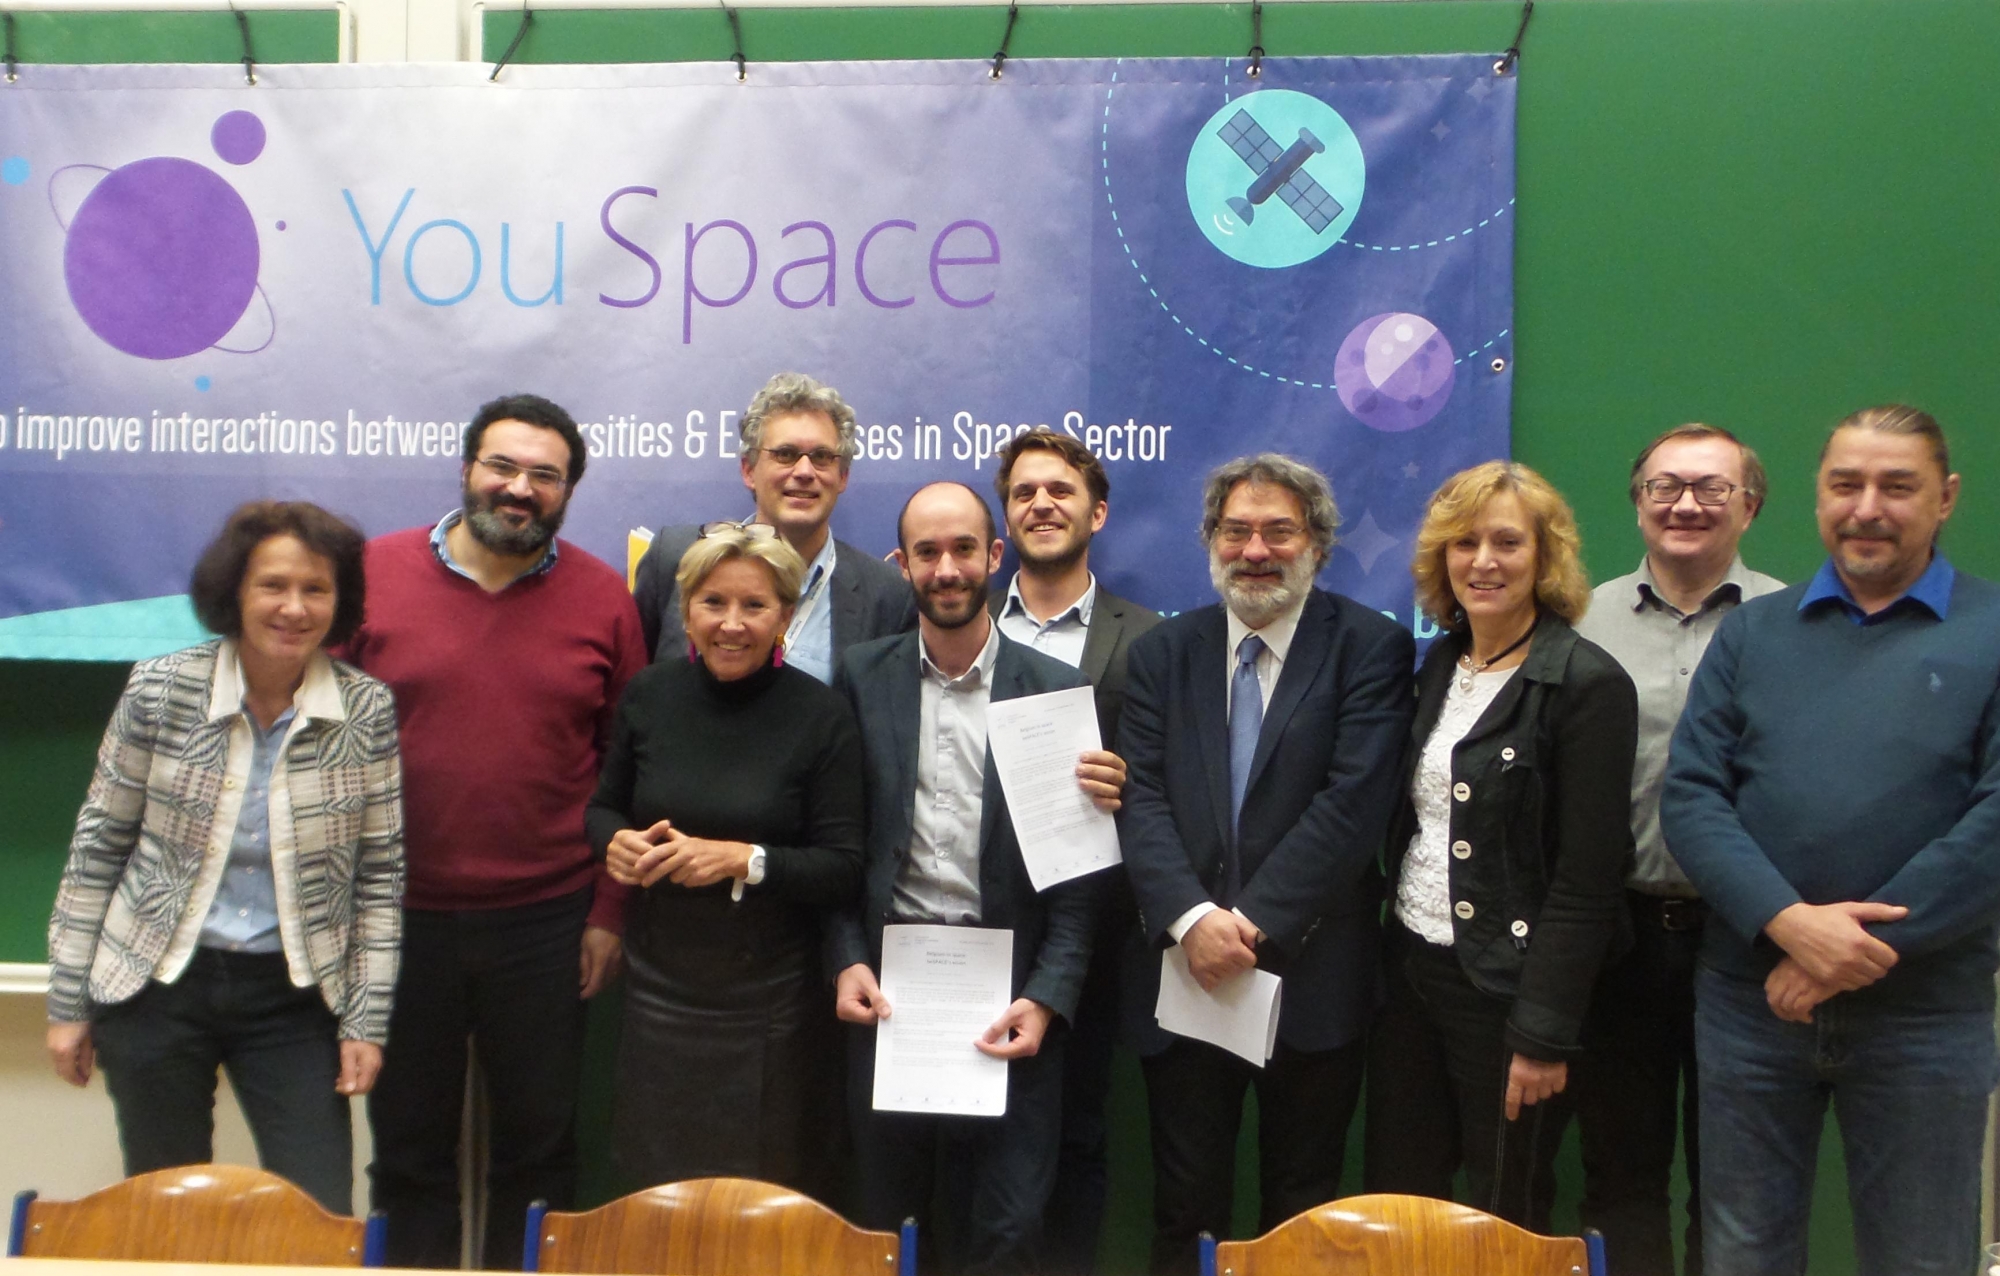 YouSpace in Universities at VUB/ULB